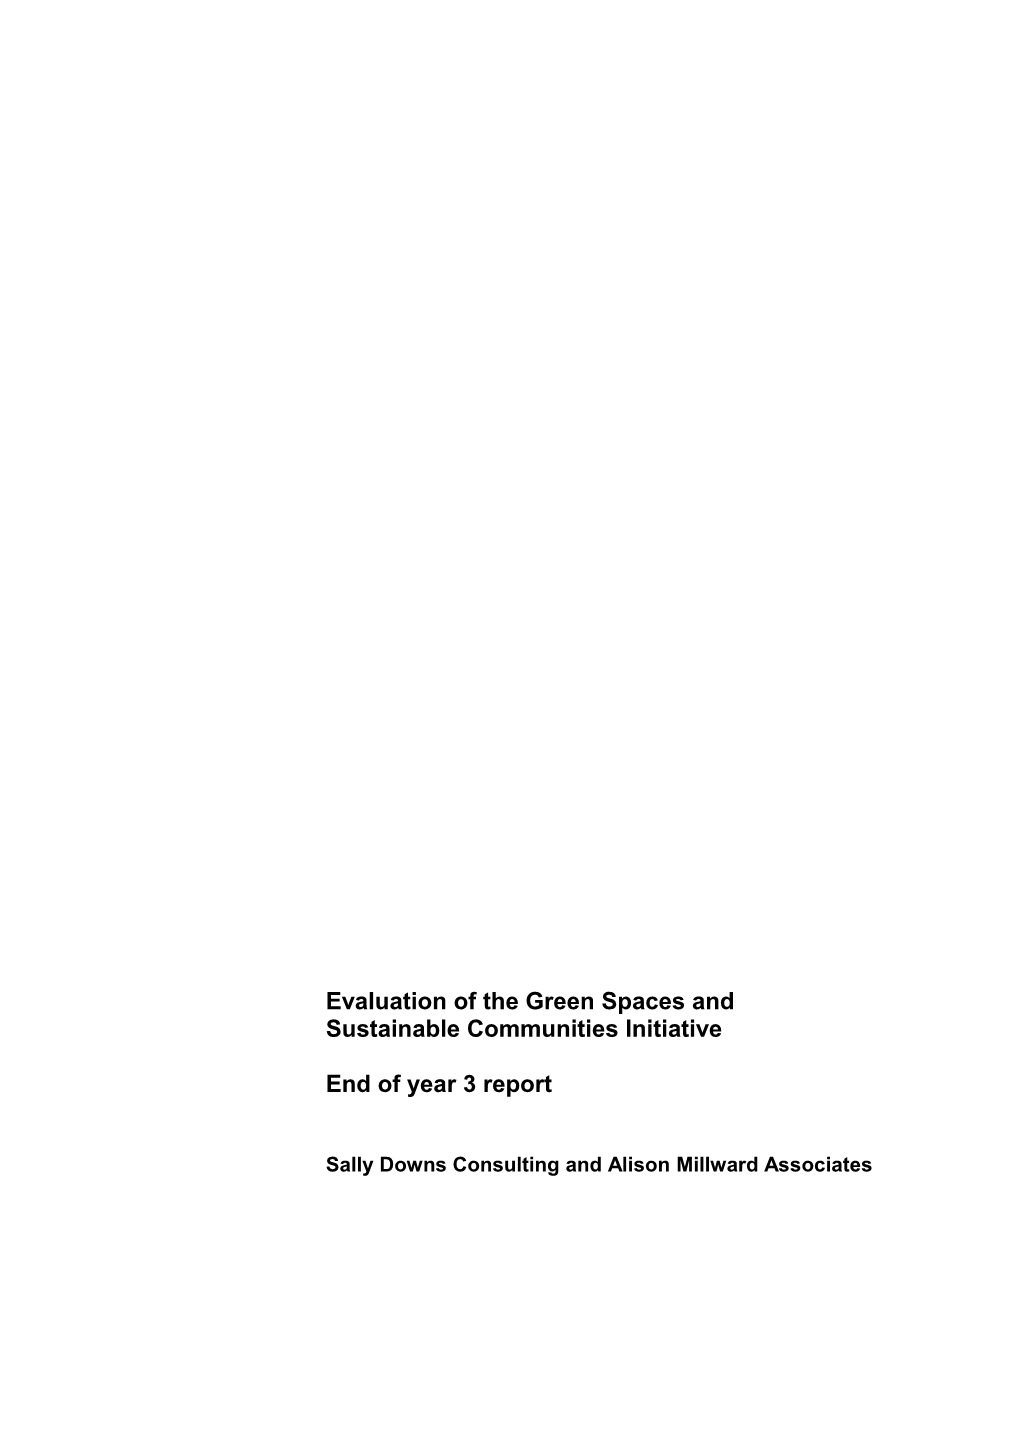 Evaluation of the Green Spaces and Sustainable Communities Initiative